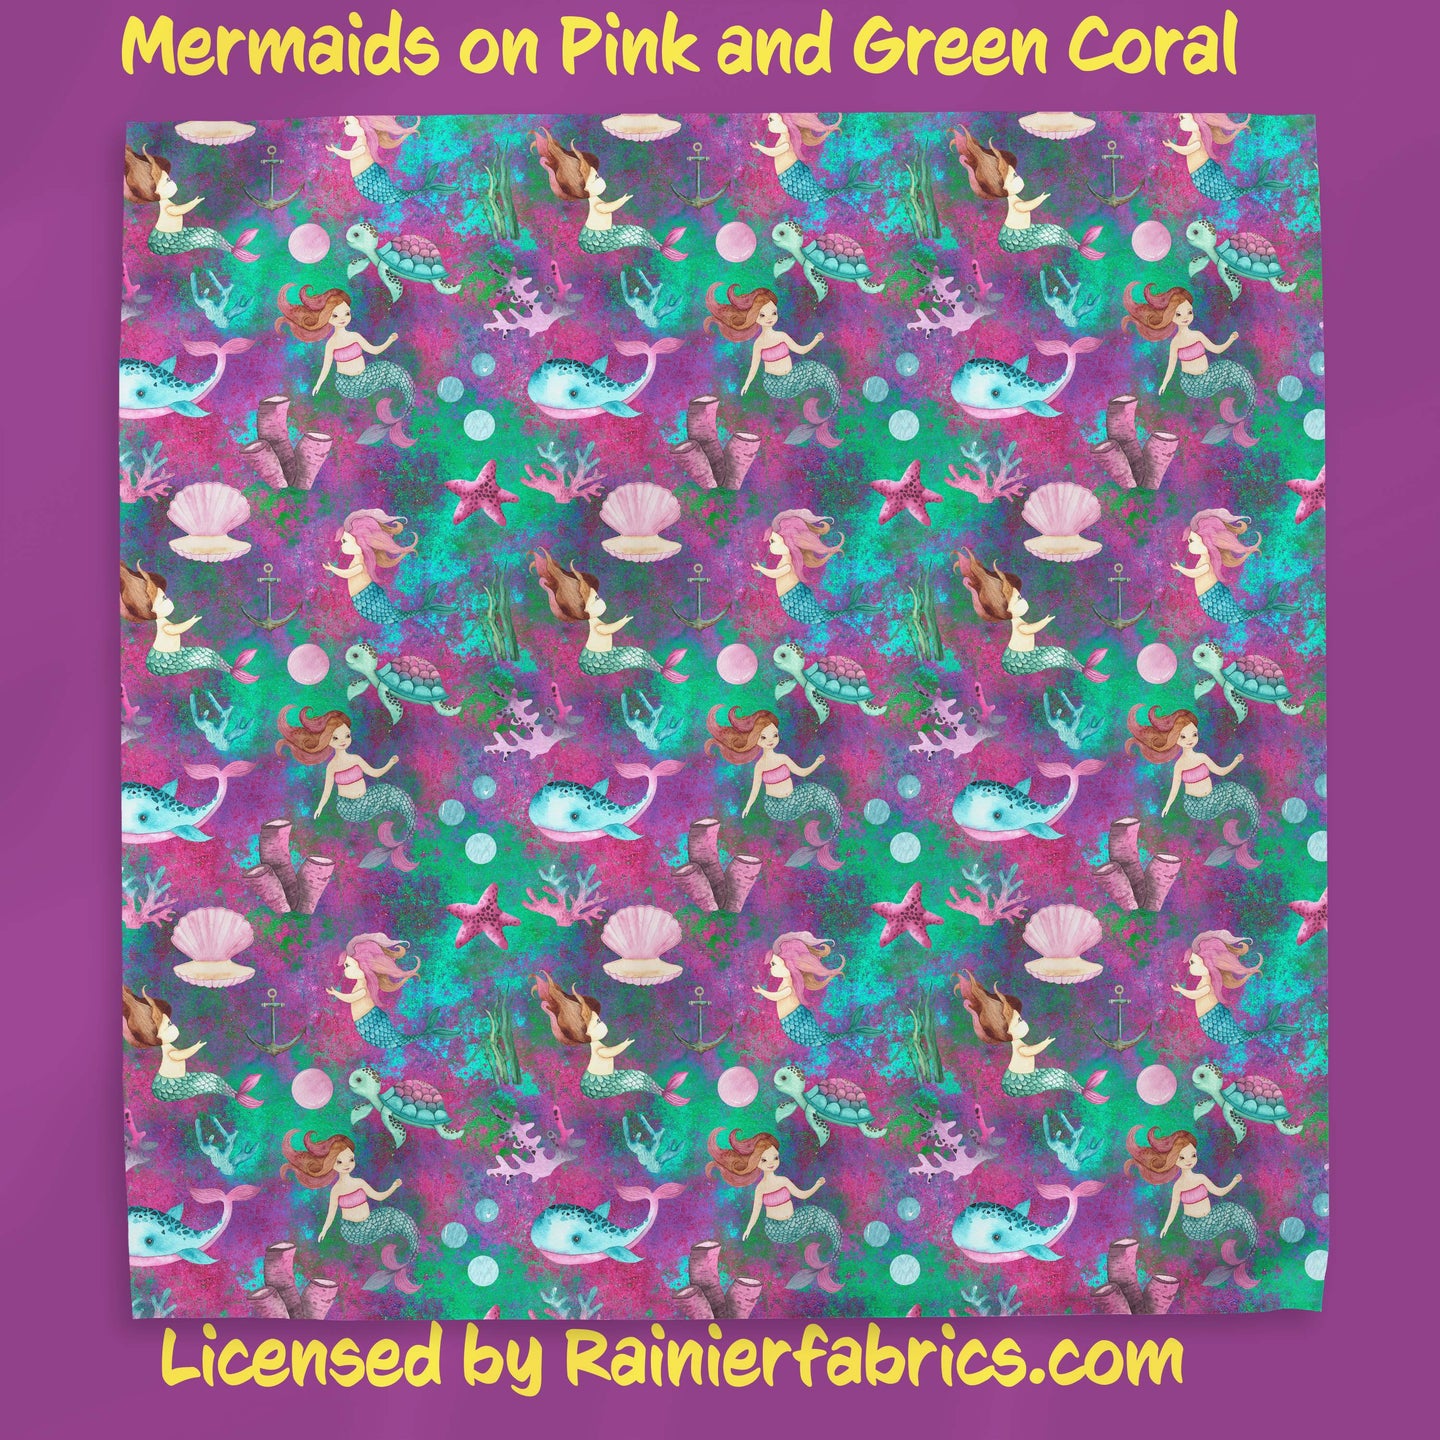 Mermaids Under the Sea with Background Options - 2-5 day turnaround - Order by 1/2 yard; Description of bases below